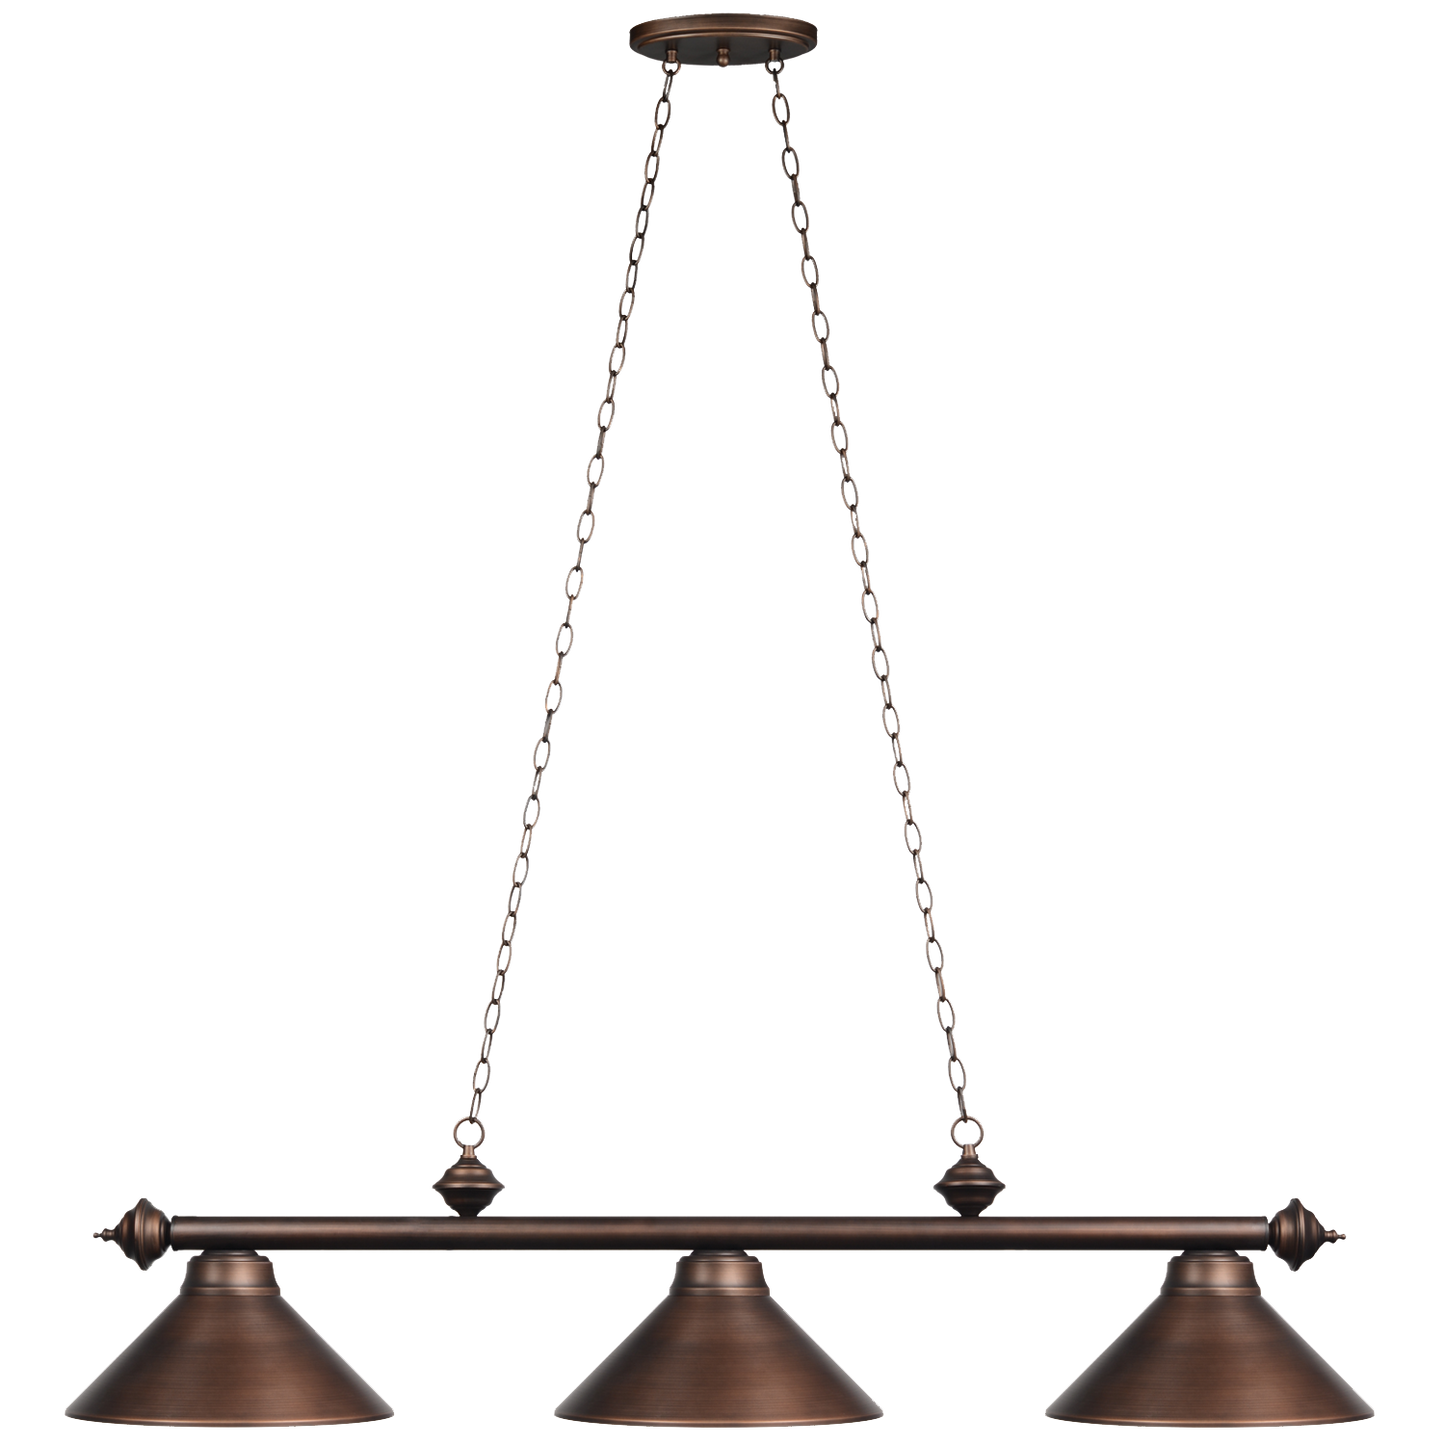 Oil Rubbed Bronze 3 Light Billiard Light with Metal Shades